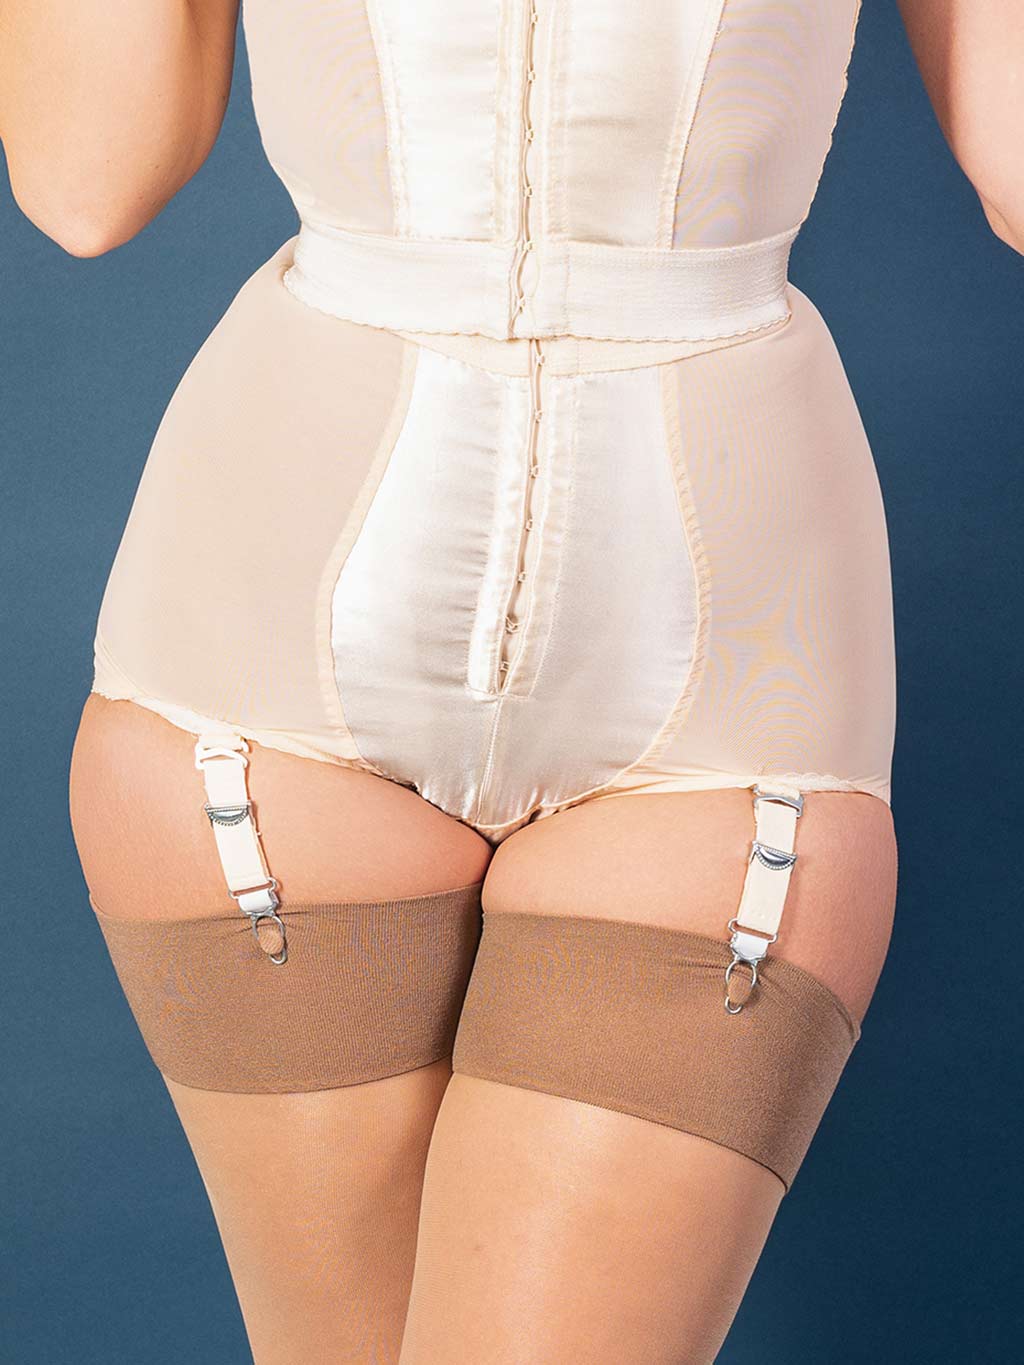 Panty Girdle  Panty Girdle With Detachable Suspenders - What